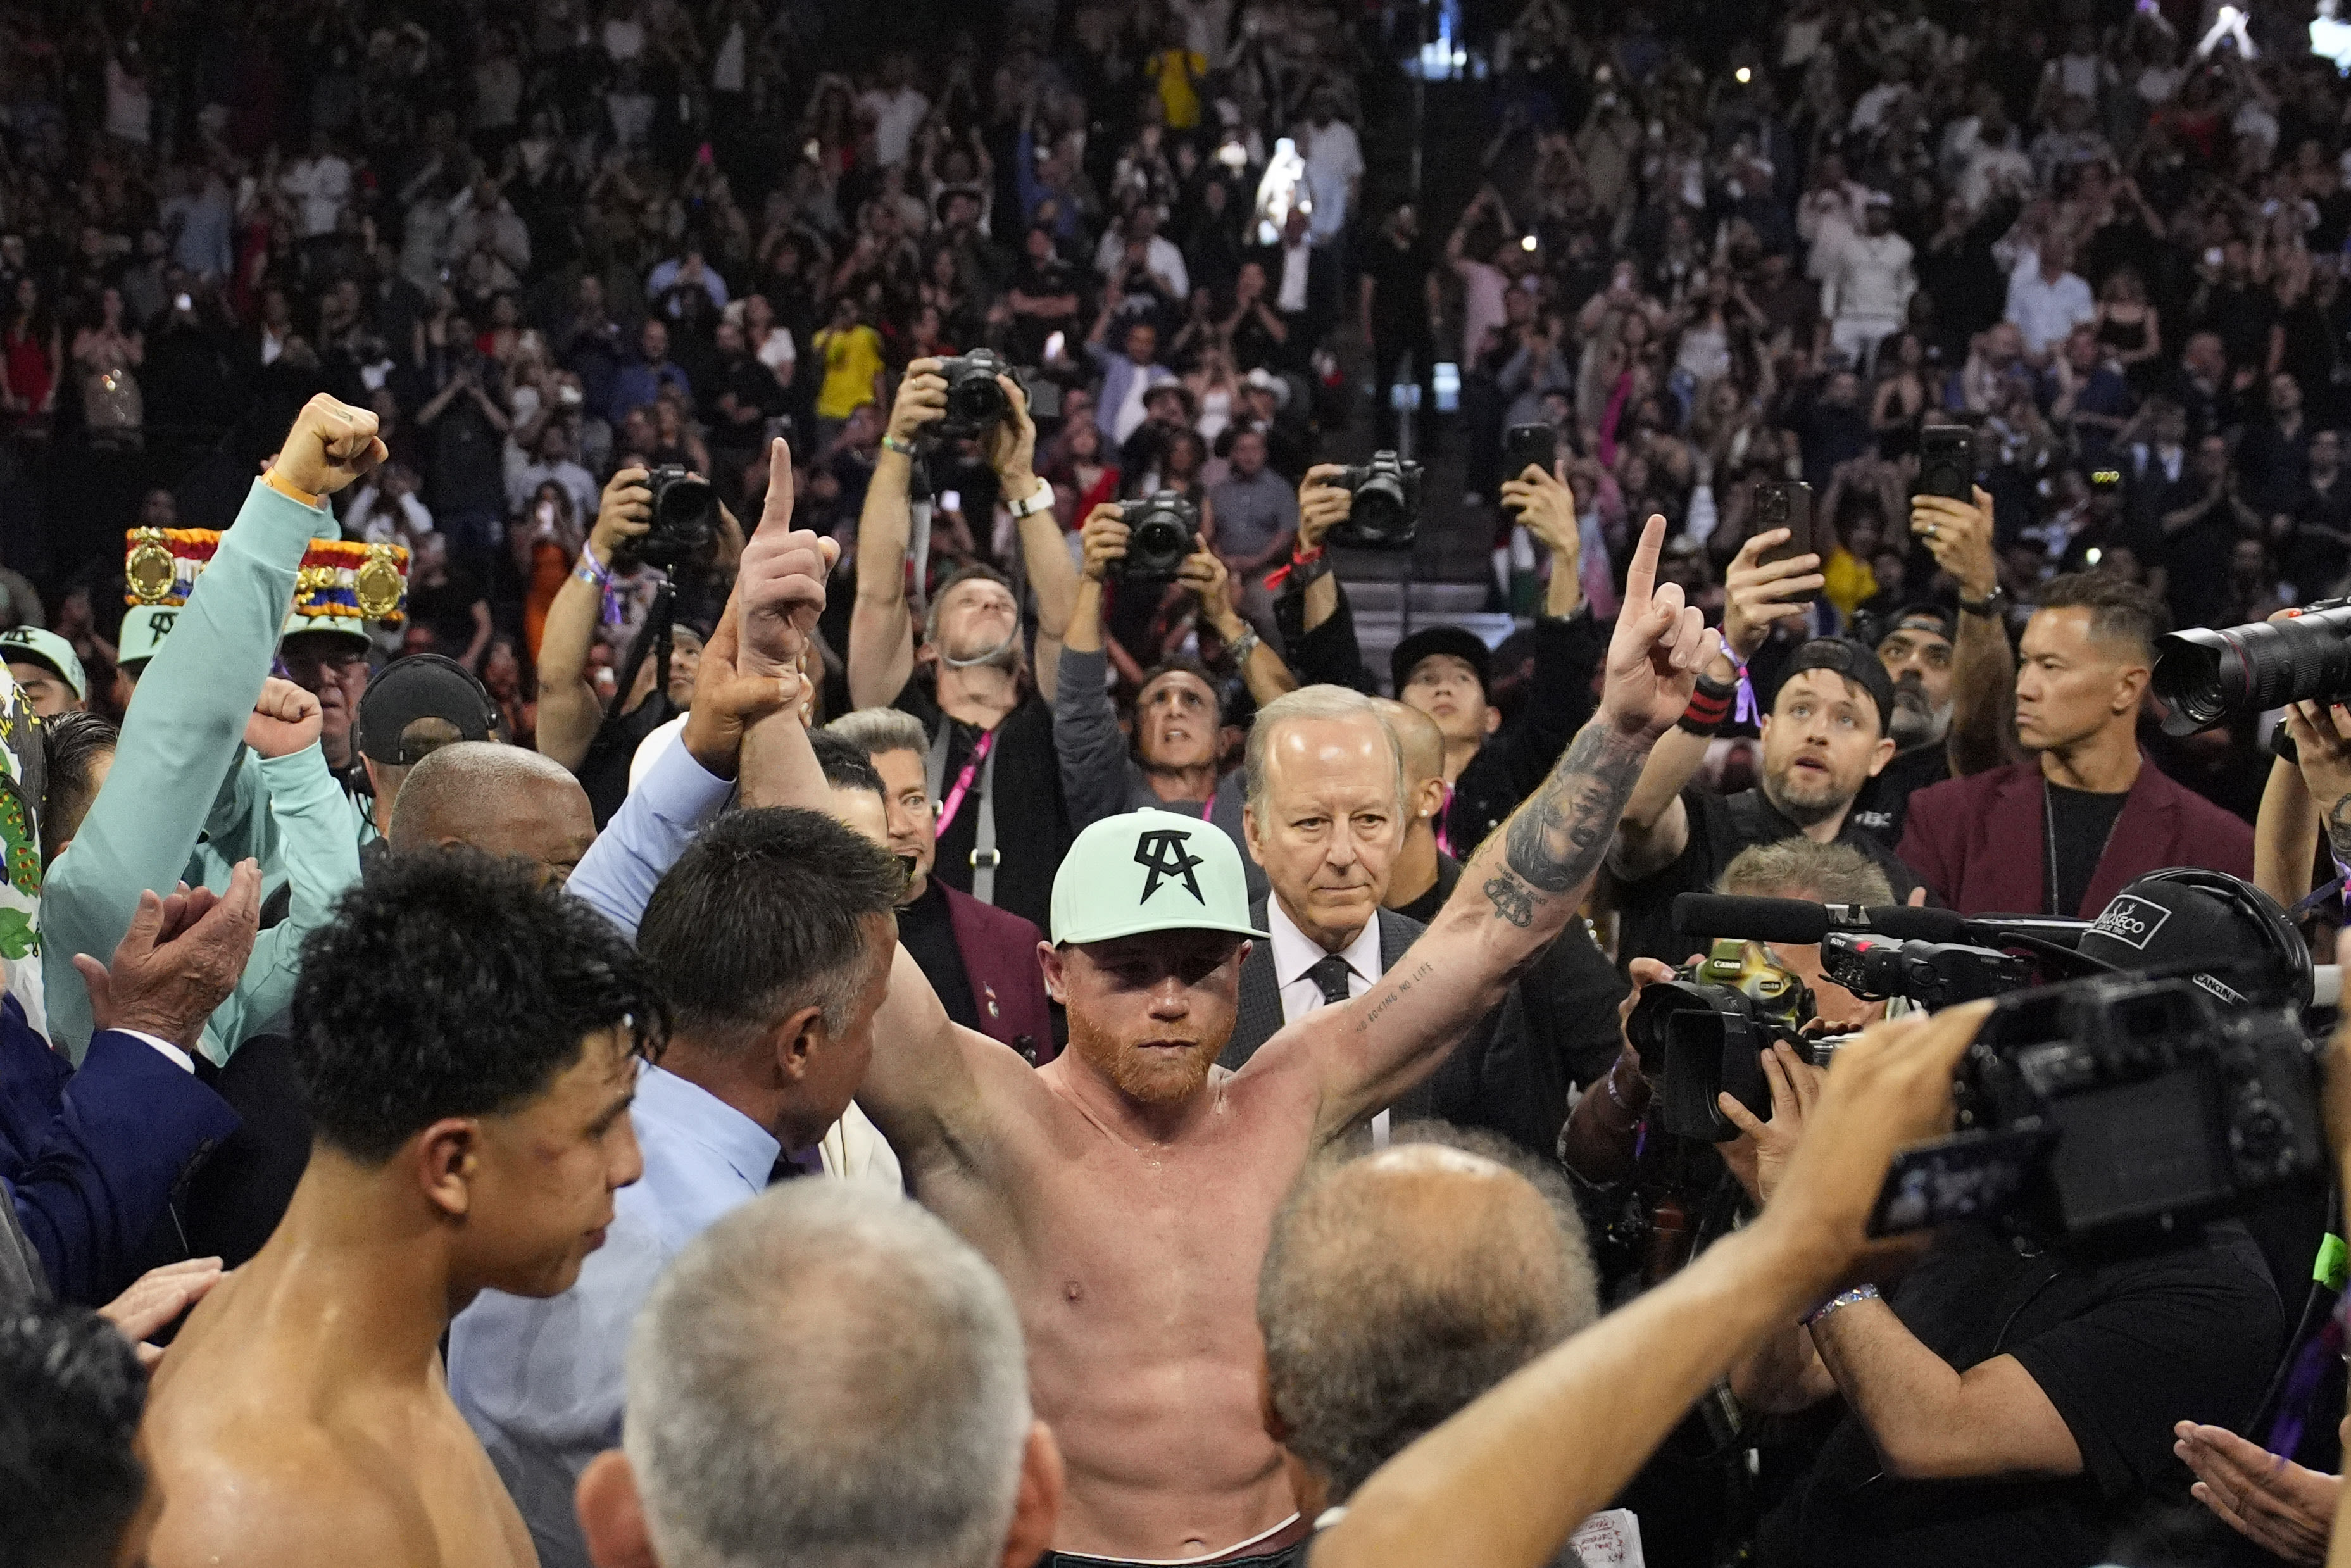 Canelo Álvarez accused of blocking two media critics from covering his fight